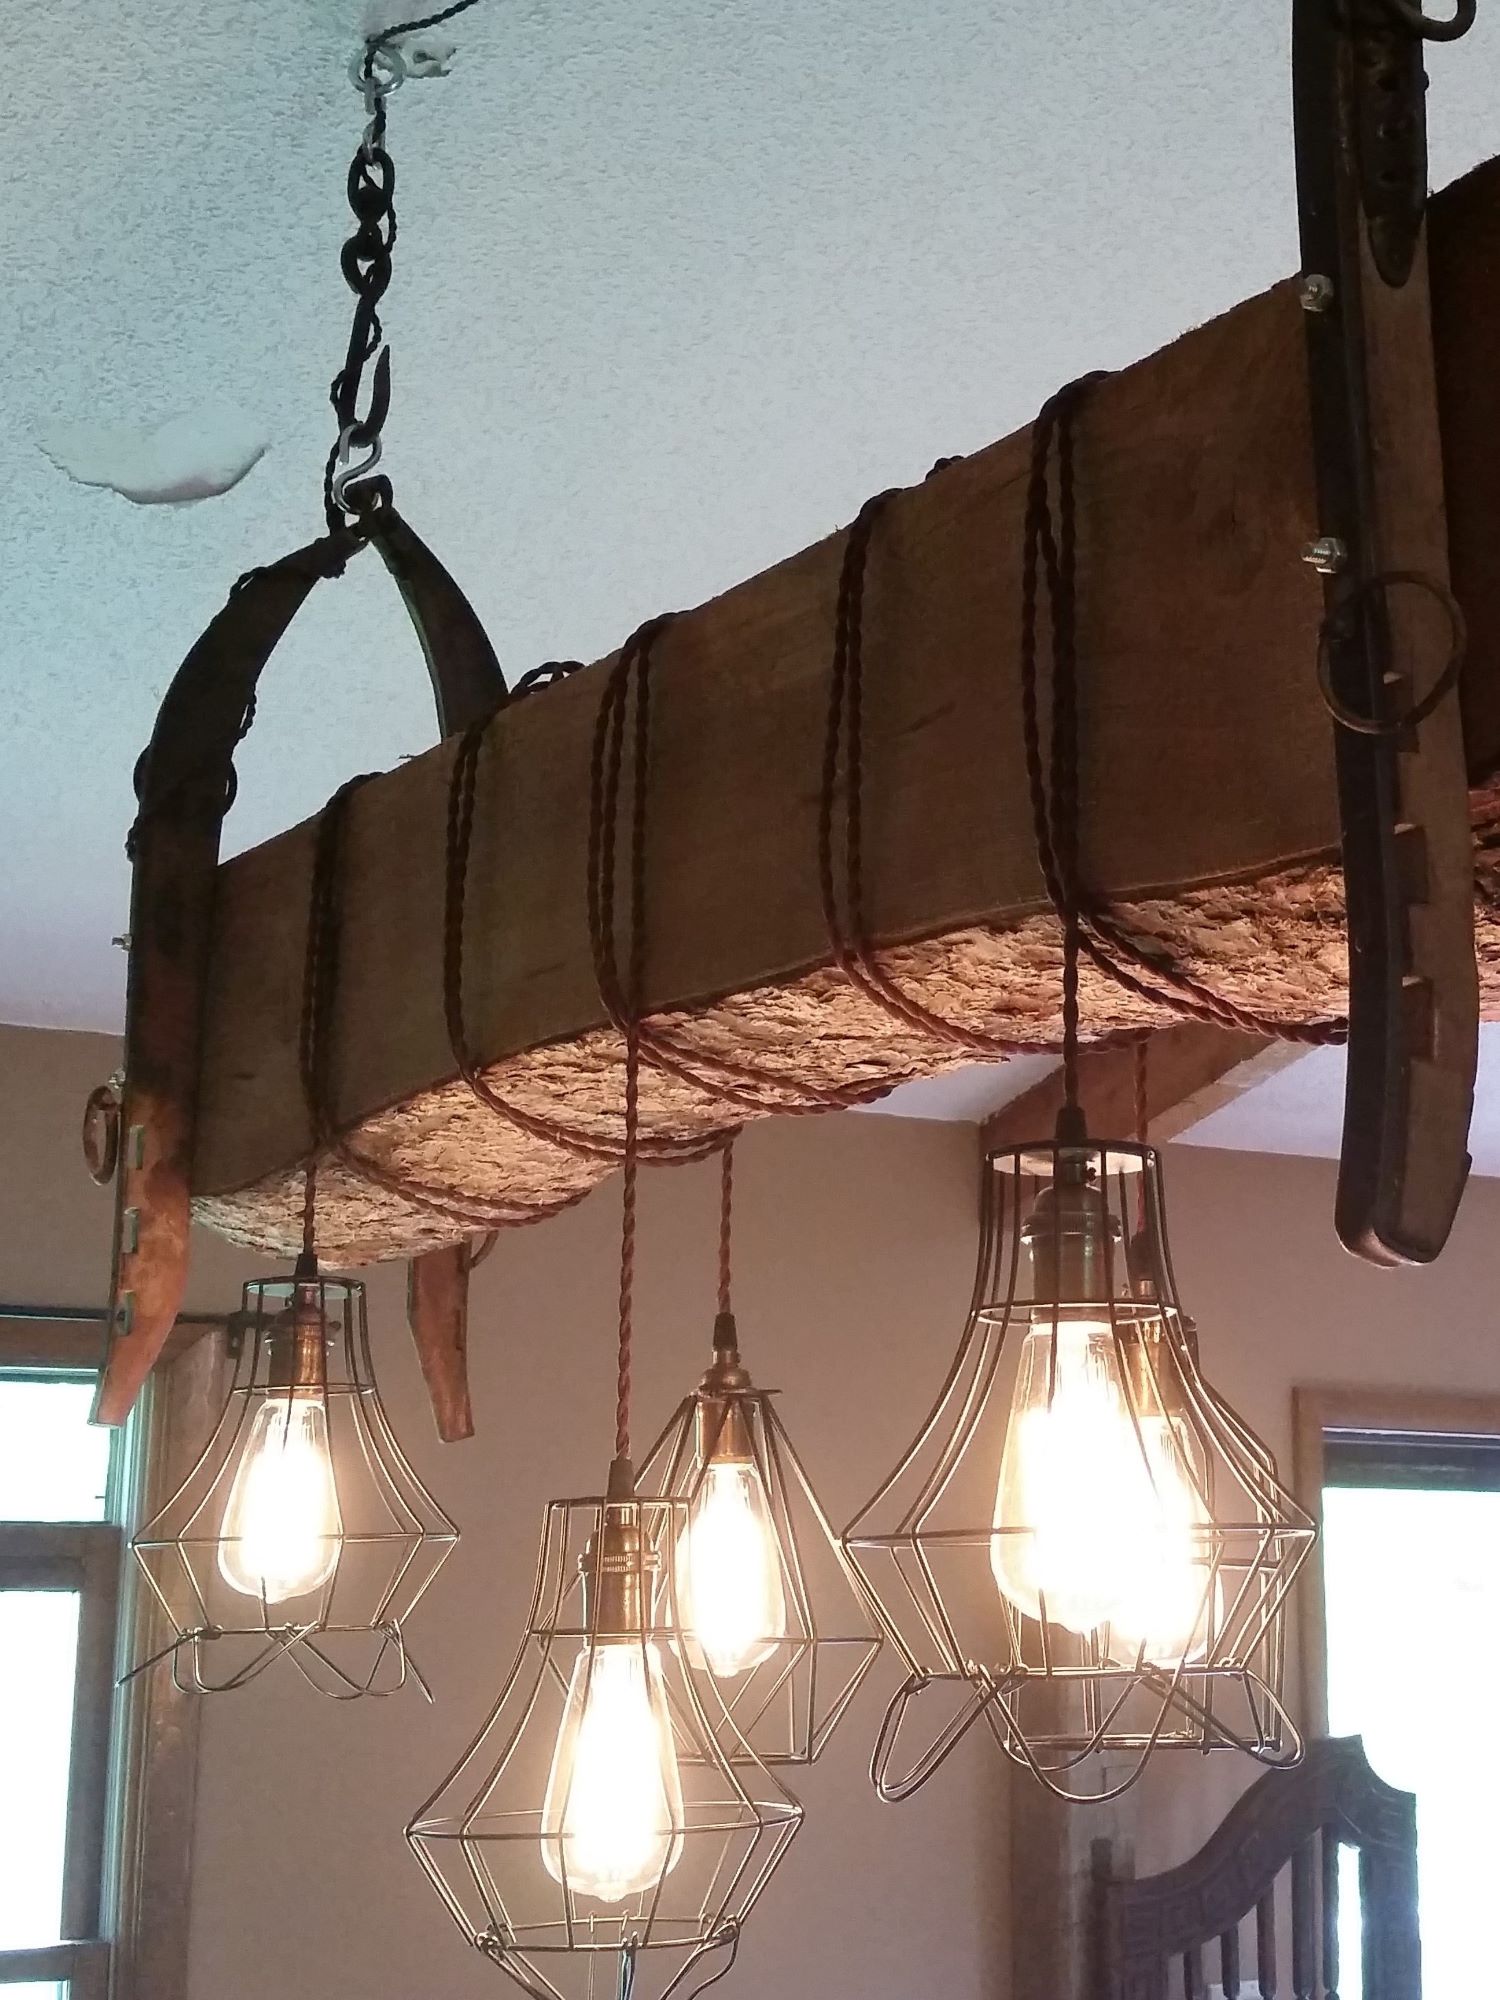 Photograph of a custom light made by one of our customers using a reclaimed barn beam